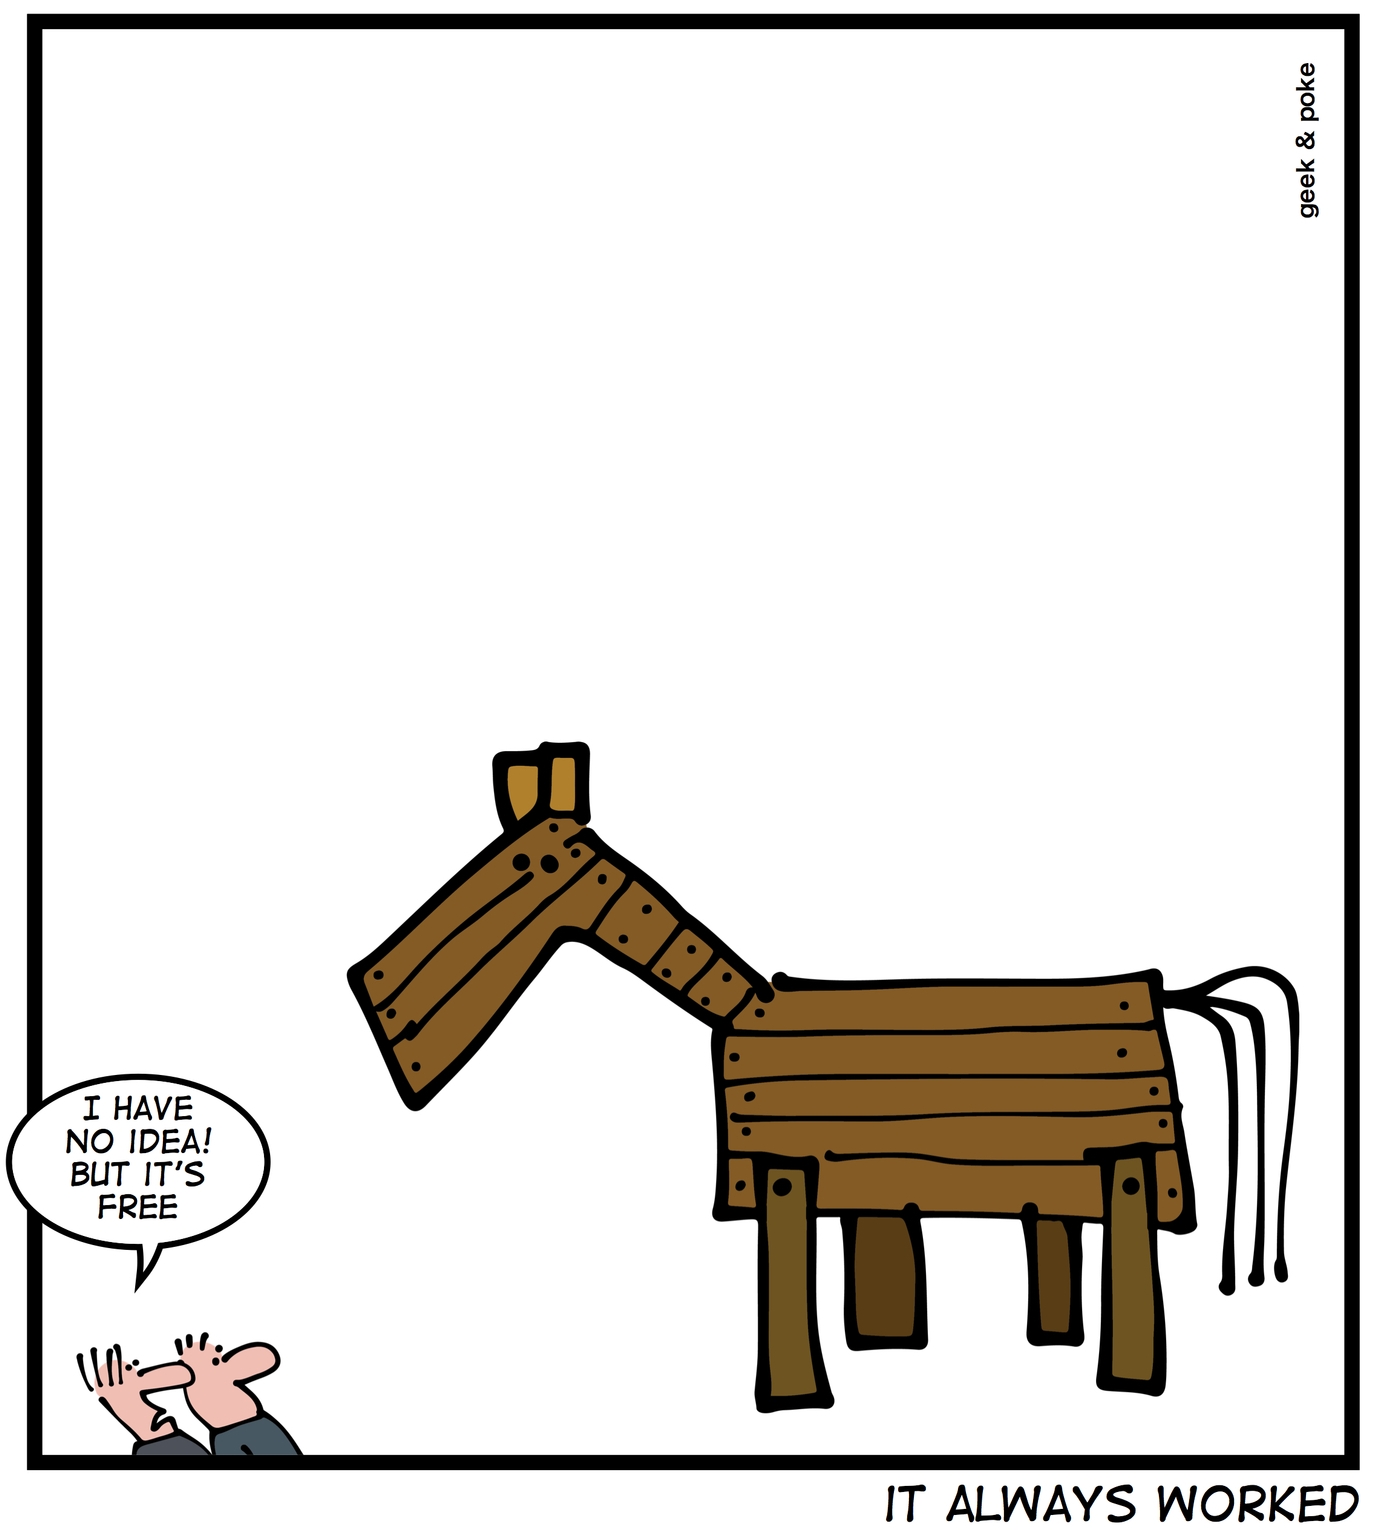 Image of a trojan horse. One man to another: I have no idea! But it's free